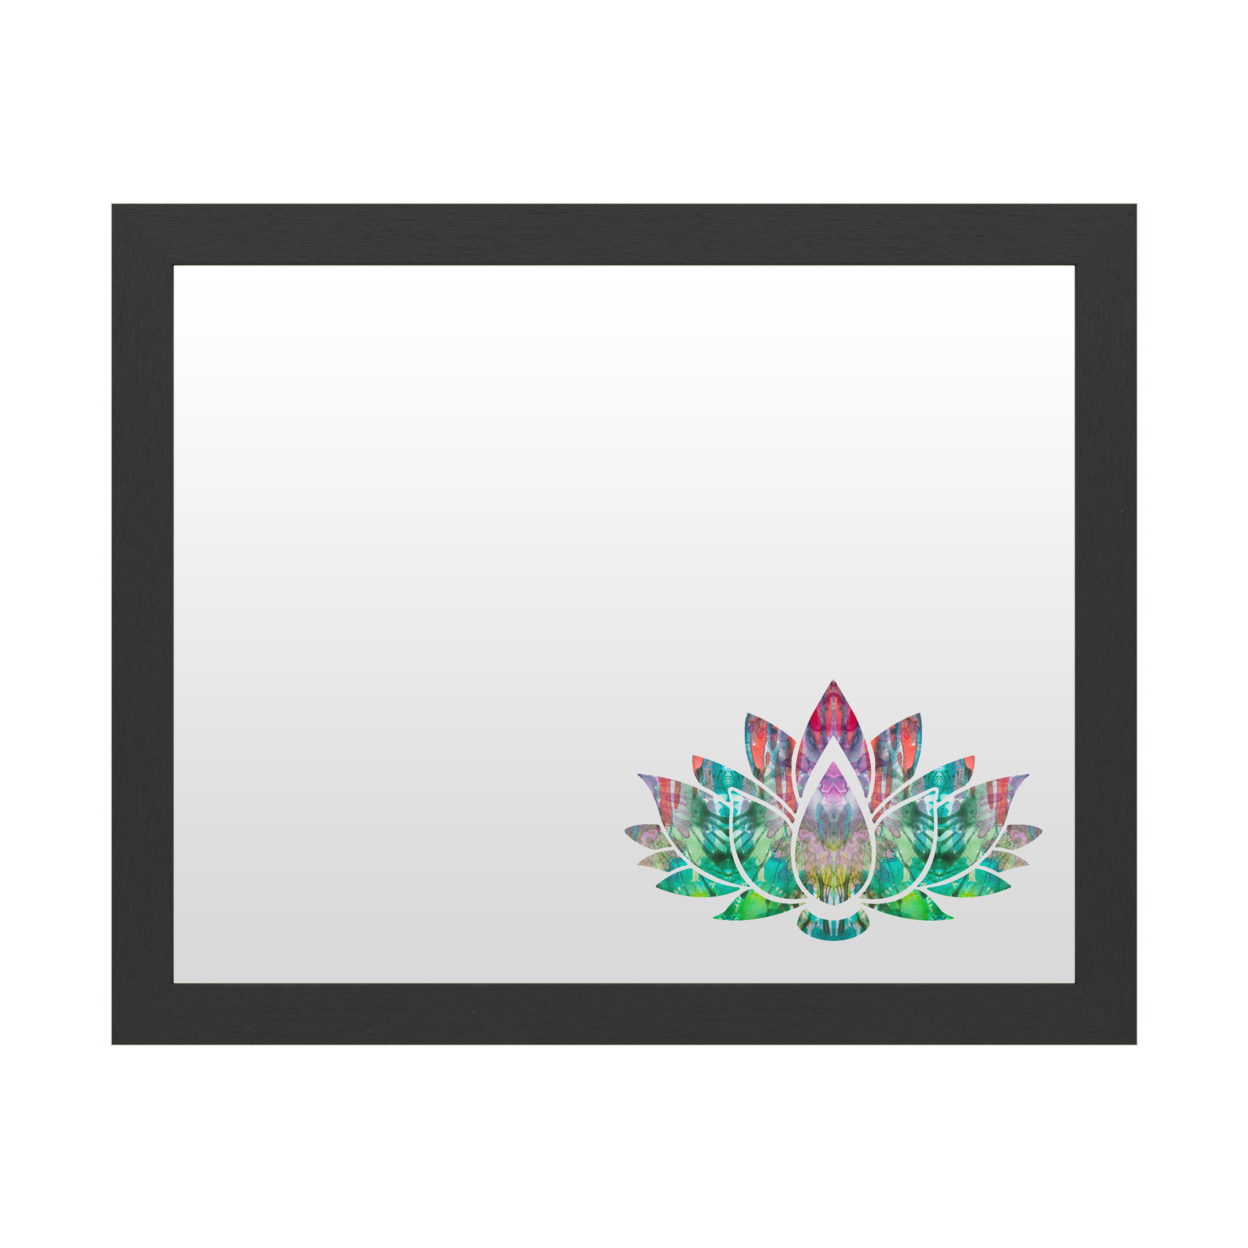 Dry Erase 16 X 20 Marker Board With Printed Artwork - Dean Russo Lotus Flower White Board - Ready To Hang